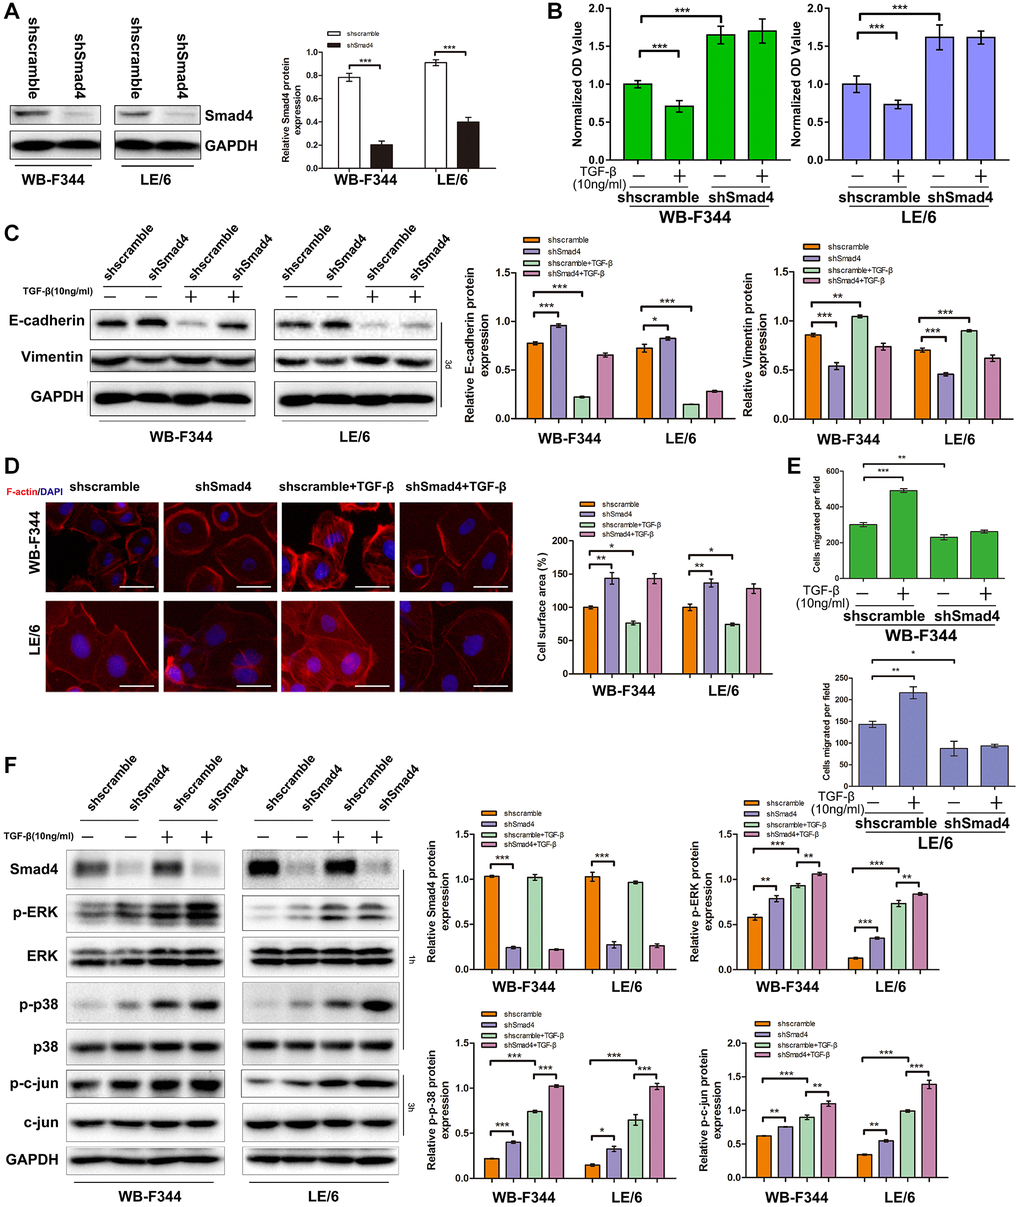 Inhibition of Smad signaling downstream of TGF-β abrogated TGF-β-induced cytostasis and EMT and strengthened MAPK signaling in LPCs. (A) Western blotting was used to measure the expression of Smad4 in WB-shSmad4, LE-shSmad4, and control cells (WB-shScramble or LE-shcramble cells). GAPDH was used as a loading control. (B) CCK-8 assays of WB-shSmad4, LE-shSmad4 and control cells before and after treatment with TGF-β (10 ng/ml, 3d). OD values were normalized to those of the control groups. (C) WB-shSmad4, LE-shSmad4, and control cells were treated with TGF-β (10 ng/ml, 3d) as indicated, and Western blot analyses were carried out with antibodies against E-cadherin and vimentin. GAPDH was used as a loading control. (D) WB-shSmad4, LE-shSmad4 and control cells were treated with TGF-β (10 ng/ml) for 3 days and then subjected to phalloidin staining for F-actin (red). DAPI (blue) was used to stain the cell nuclei. The white arrows indicate F-actin rearrangements. Scale bar, 25 μm. (E) Cell motility analyses of WB-shSmad4, LE-shSmad4 and control cells treated with TGF-β. The average number of migrated cells per field is shown. (F) Western blot analyses of Smad4, p-ERK, ERK, p-p38 MAPK, p38 MAPK, p-c-Jun and c-Jun expression in WB-shSmad4, LE-shSmad4, and control cells. GAPDH was used as a loading control. WB-shSmad4, LE-shSmad4 and control cells were treated with TGF-β (10 ng/ml) for 1 h or 3 h, respectively. These experiments were repeated three times. One-way ANOVA was used for statistical analysis. The data are presented as the mean ± S.E.M. *p **p ***p 